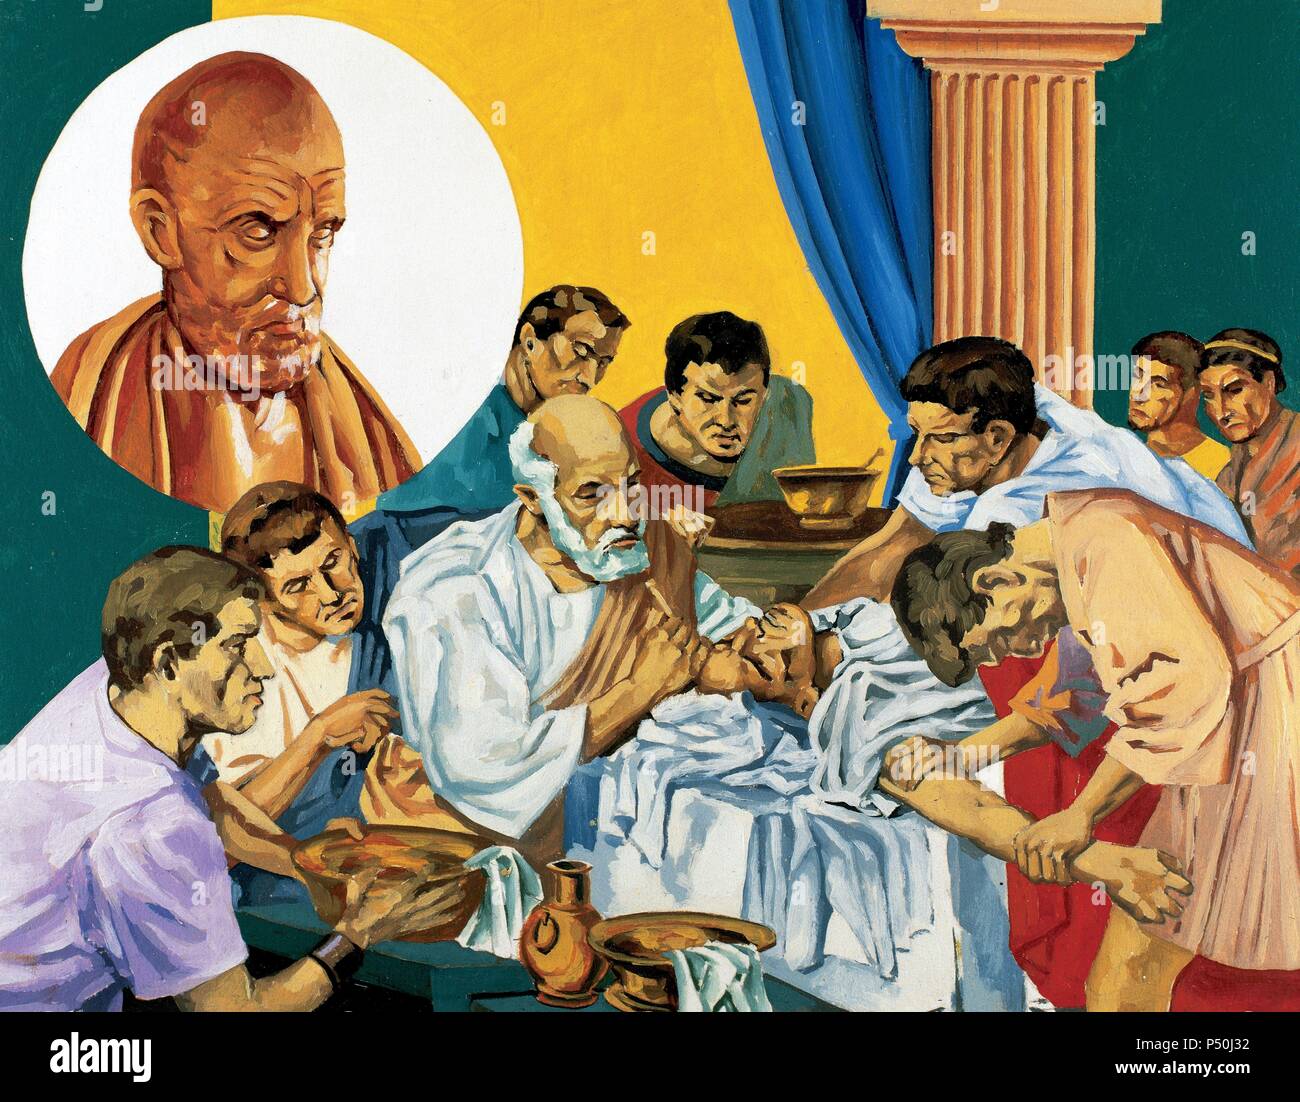 Hippocrates of Cos (ca. 460-370 BC). Ancient Greek physician. He is referred to as the father of Western medicine. Founder of the Hippocratic School of medicine. Stock Photo